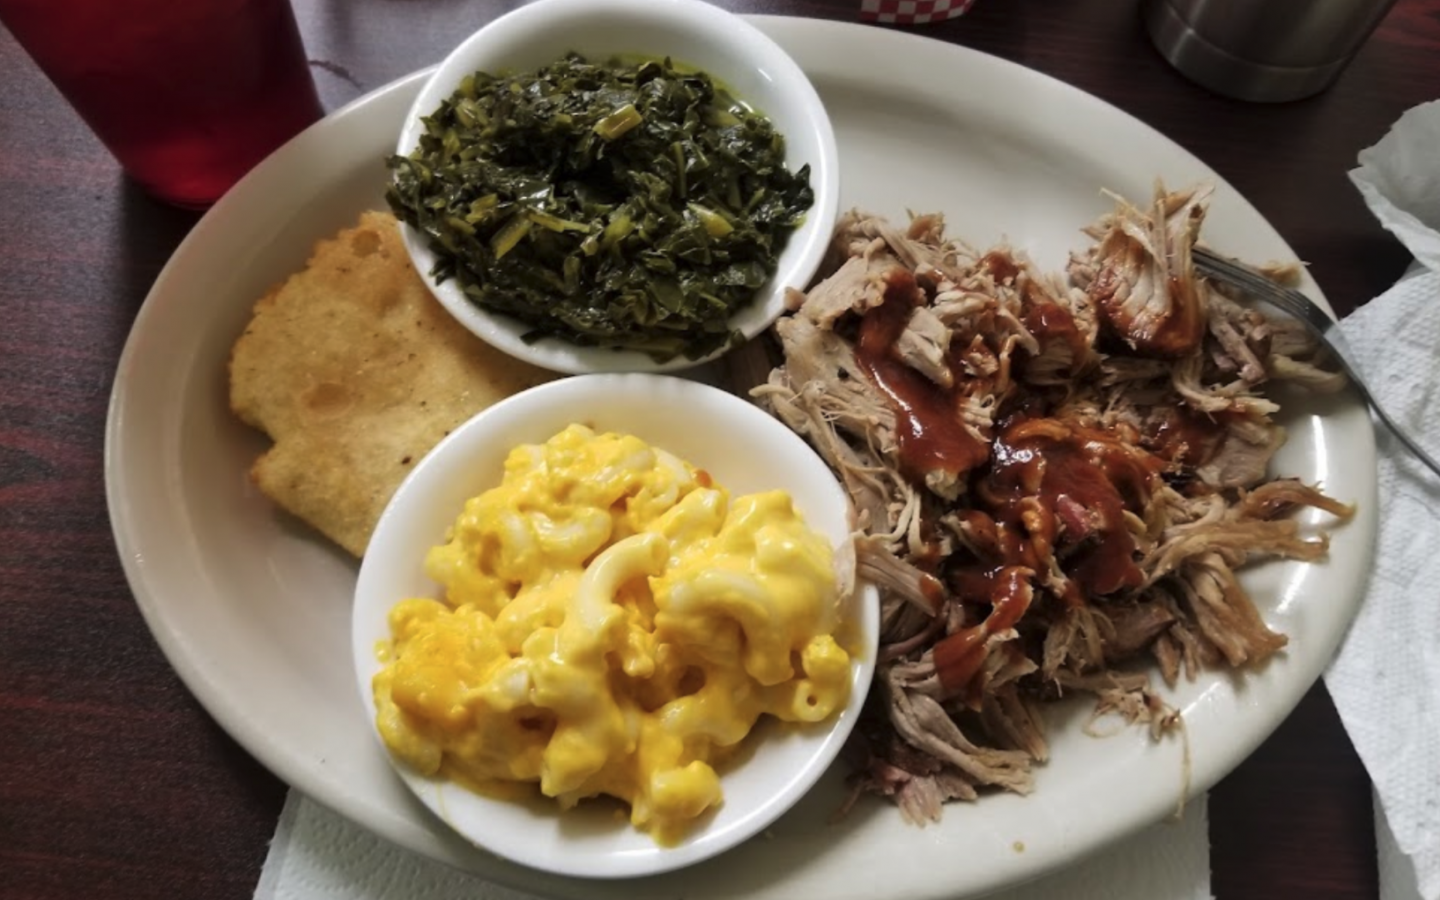 a plate with greens, homemade Mac and cheese, pulled pork with bbq sauce